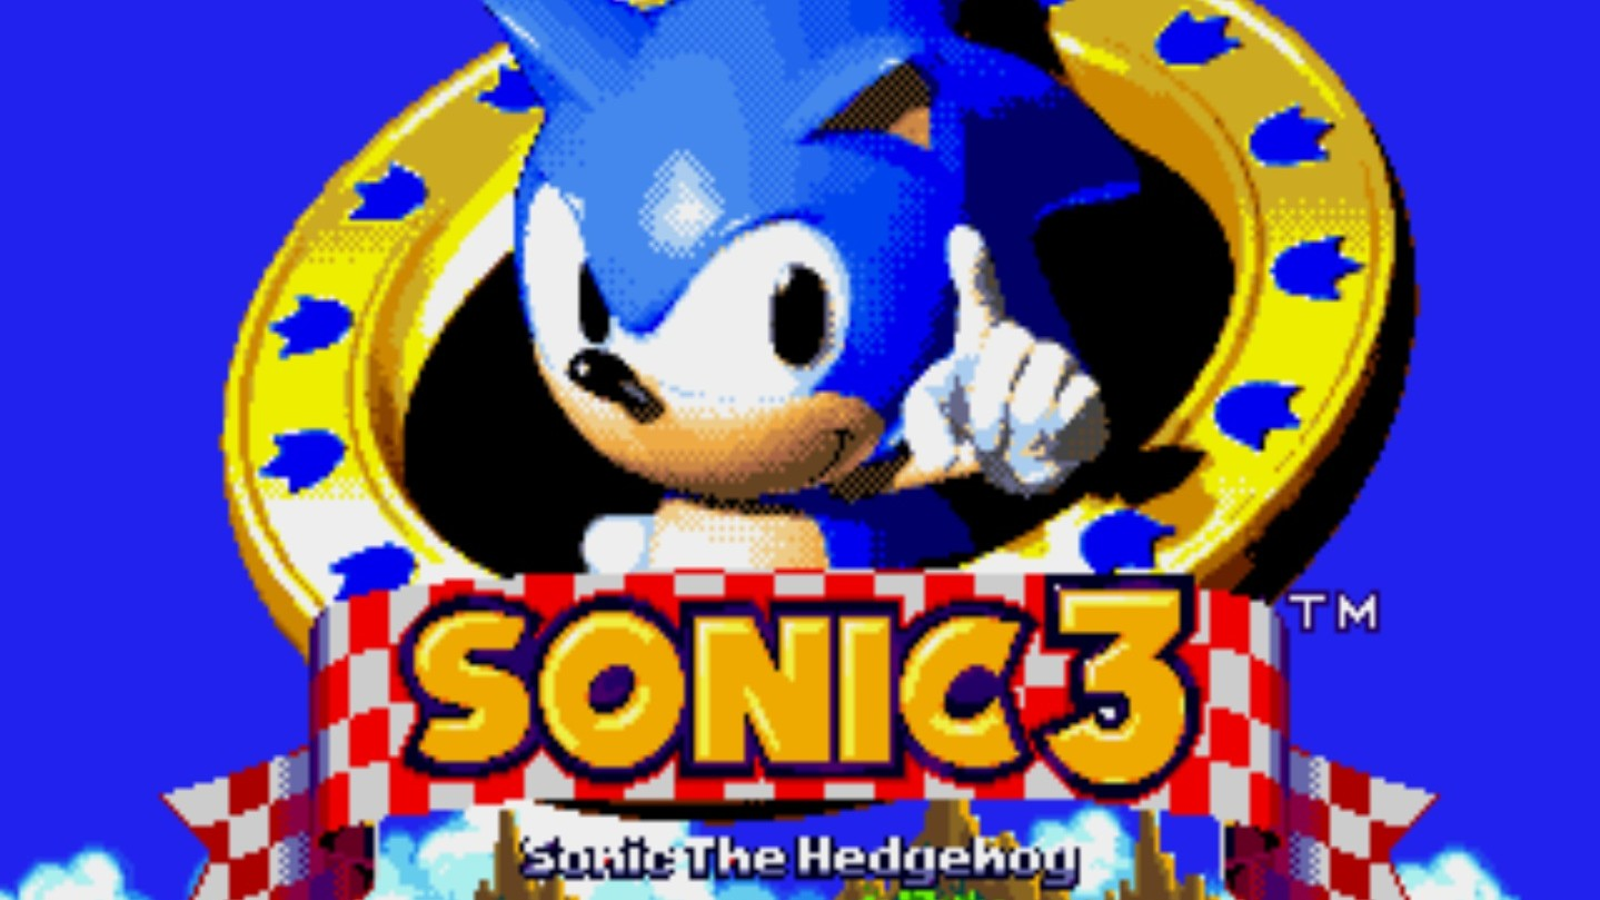 Sonic 3 Complete & others - But does it work on Real Hardware? 